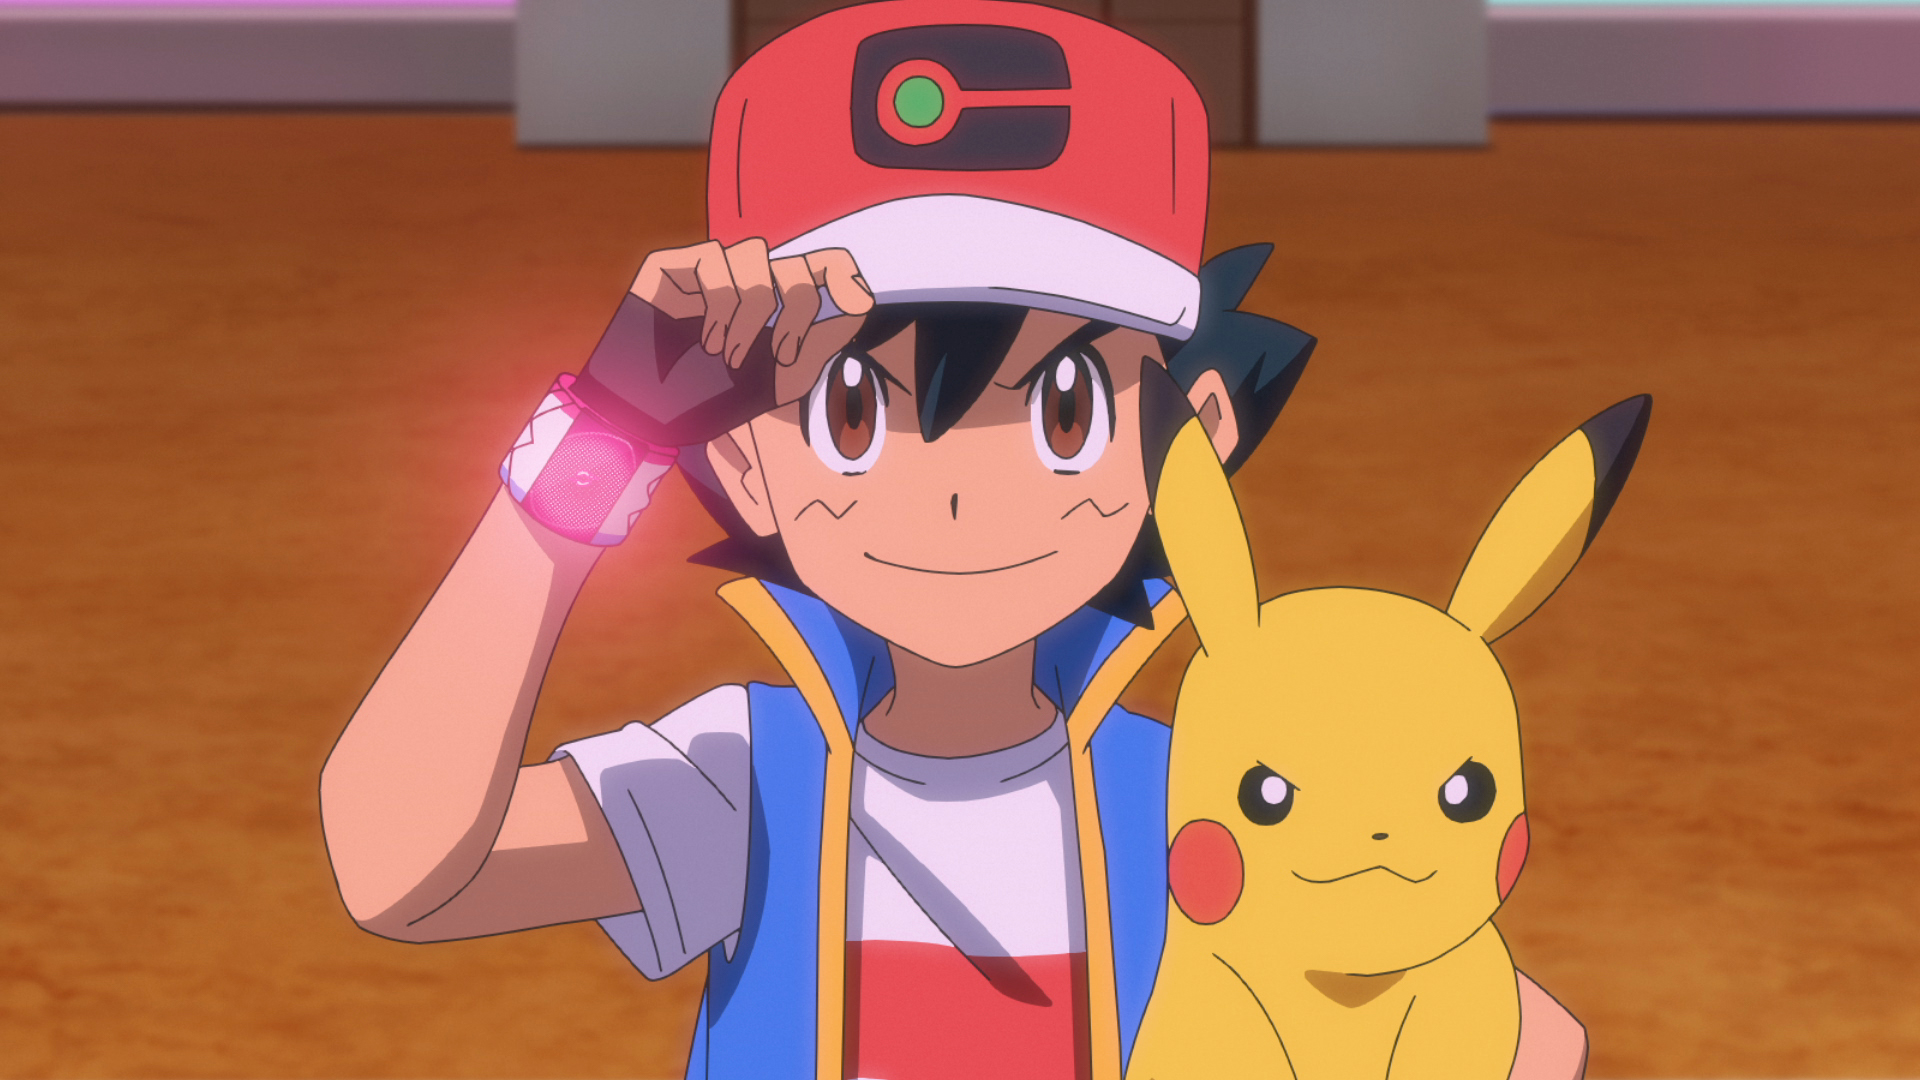 See Ash Become Pokemon Champion in the Pokemon Ultimate Journeys Anime in  June